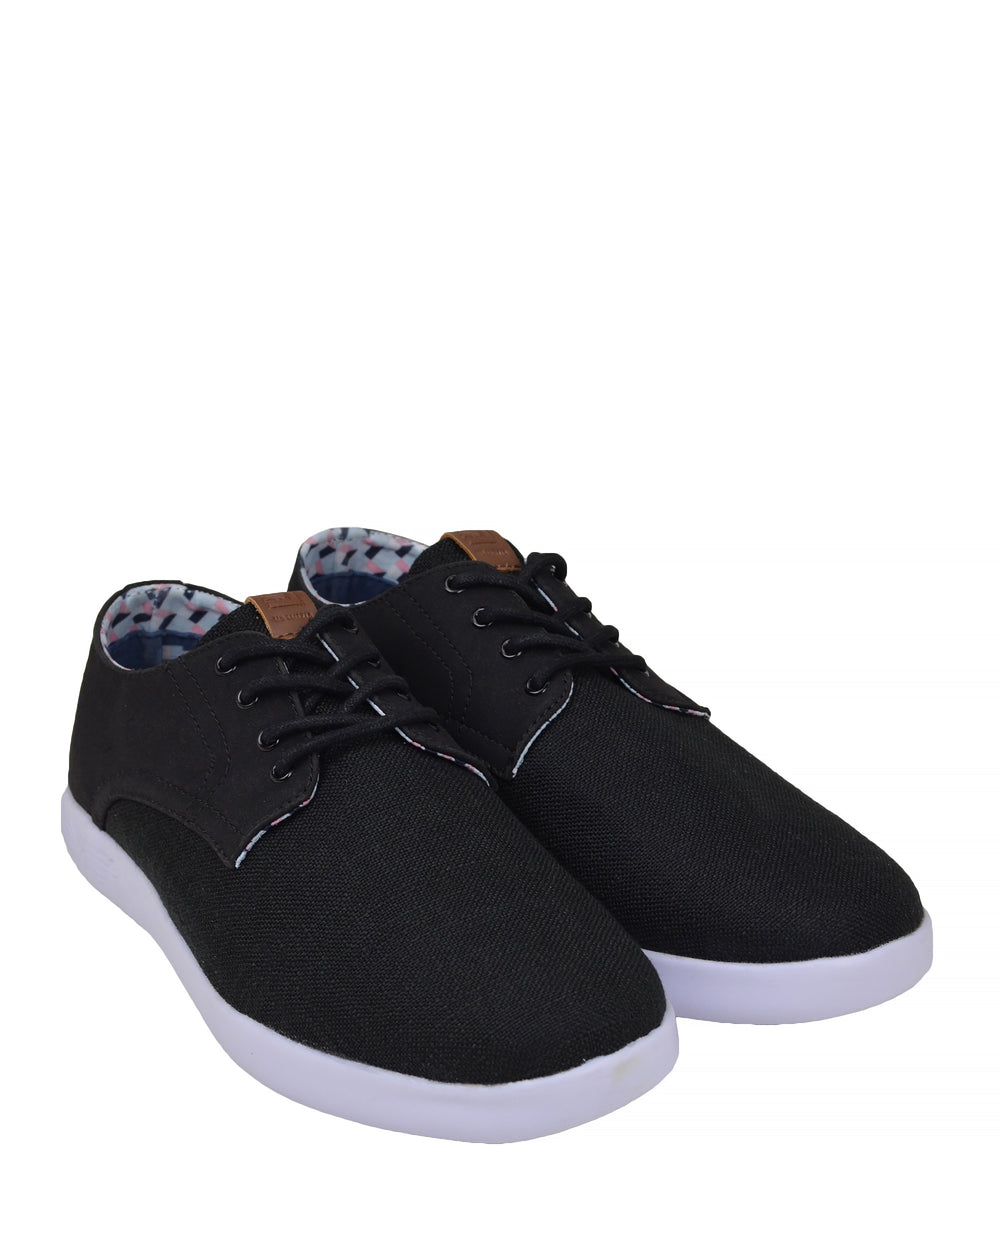 Parnell Oxford Lace-Up Sneaker - Black Multi